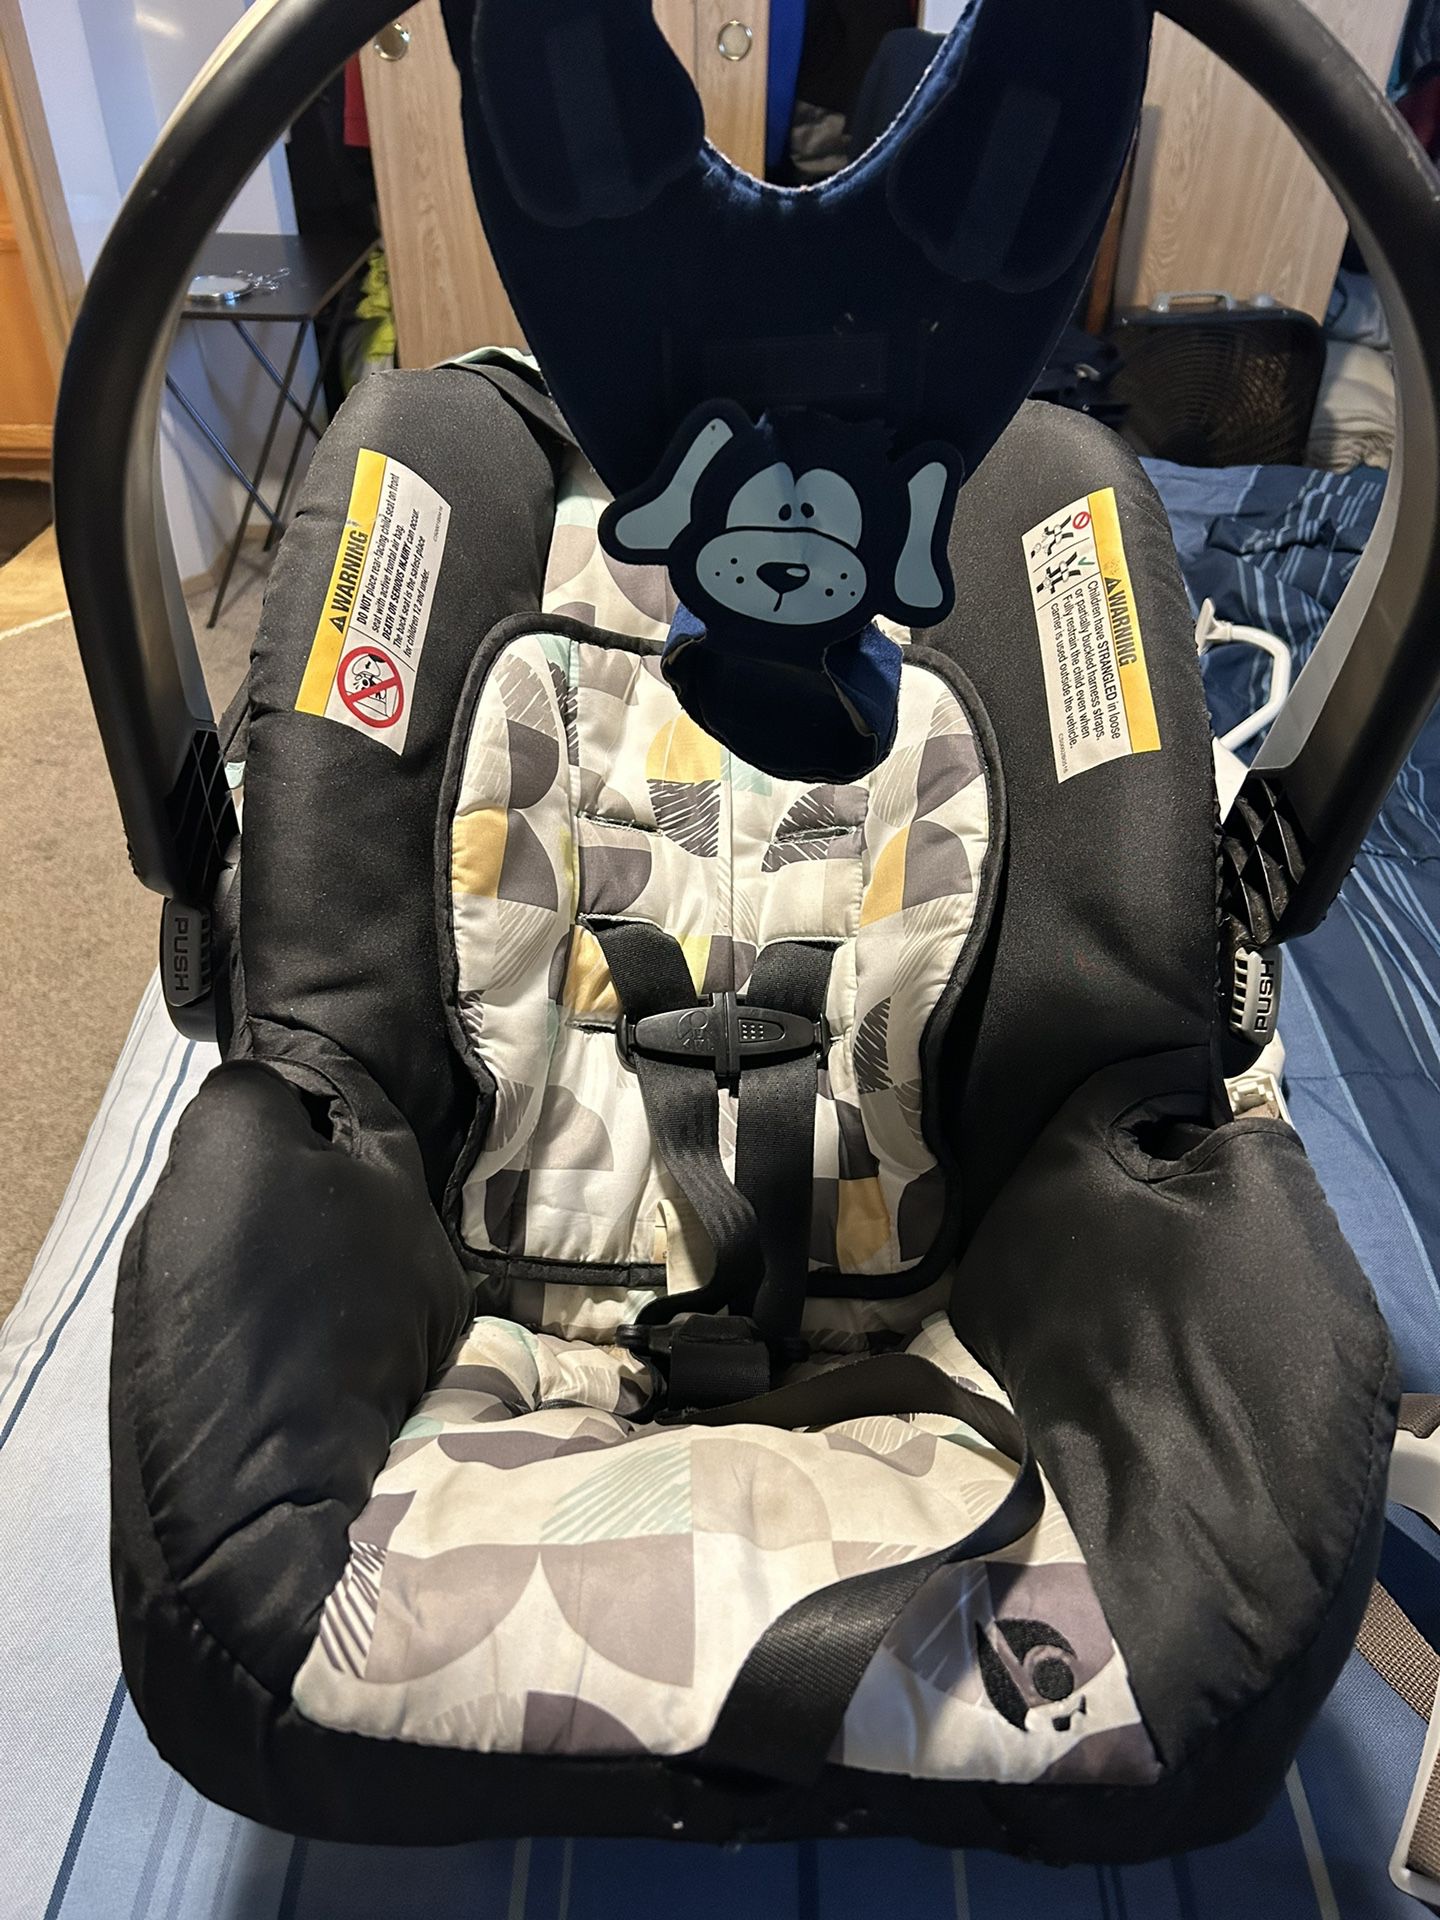 Infant Car Seat, High Chair,  Booster eating seat